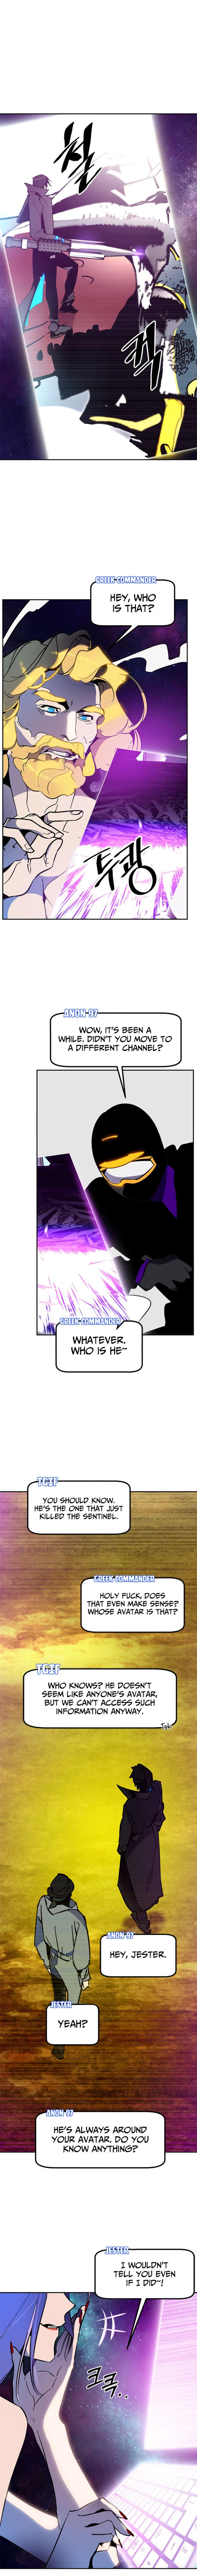 return-to-player-chap-35-1